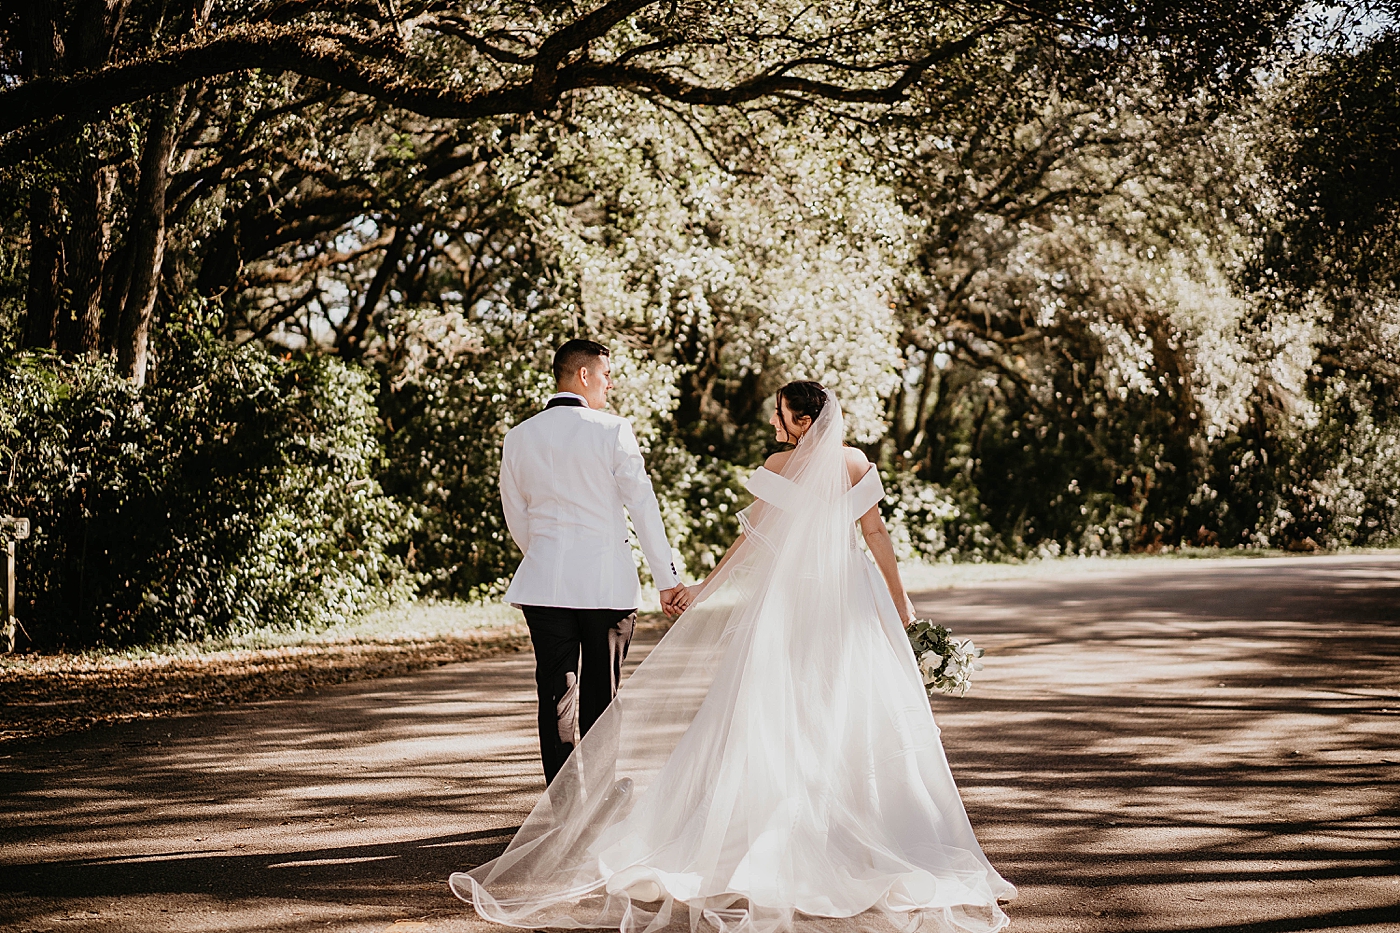 Bride and Groom walking down road and holding hands Lavan Venue Wedding Photography captured by South Florida Wedding Photographer Krystal Capone Photography